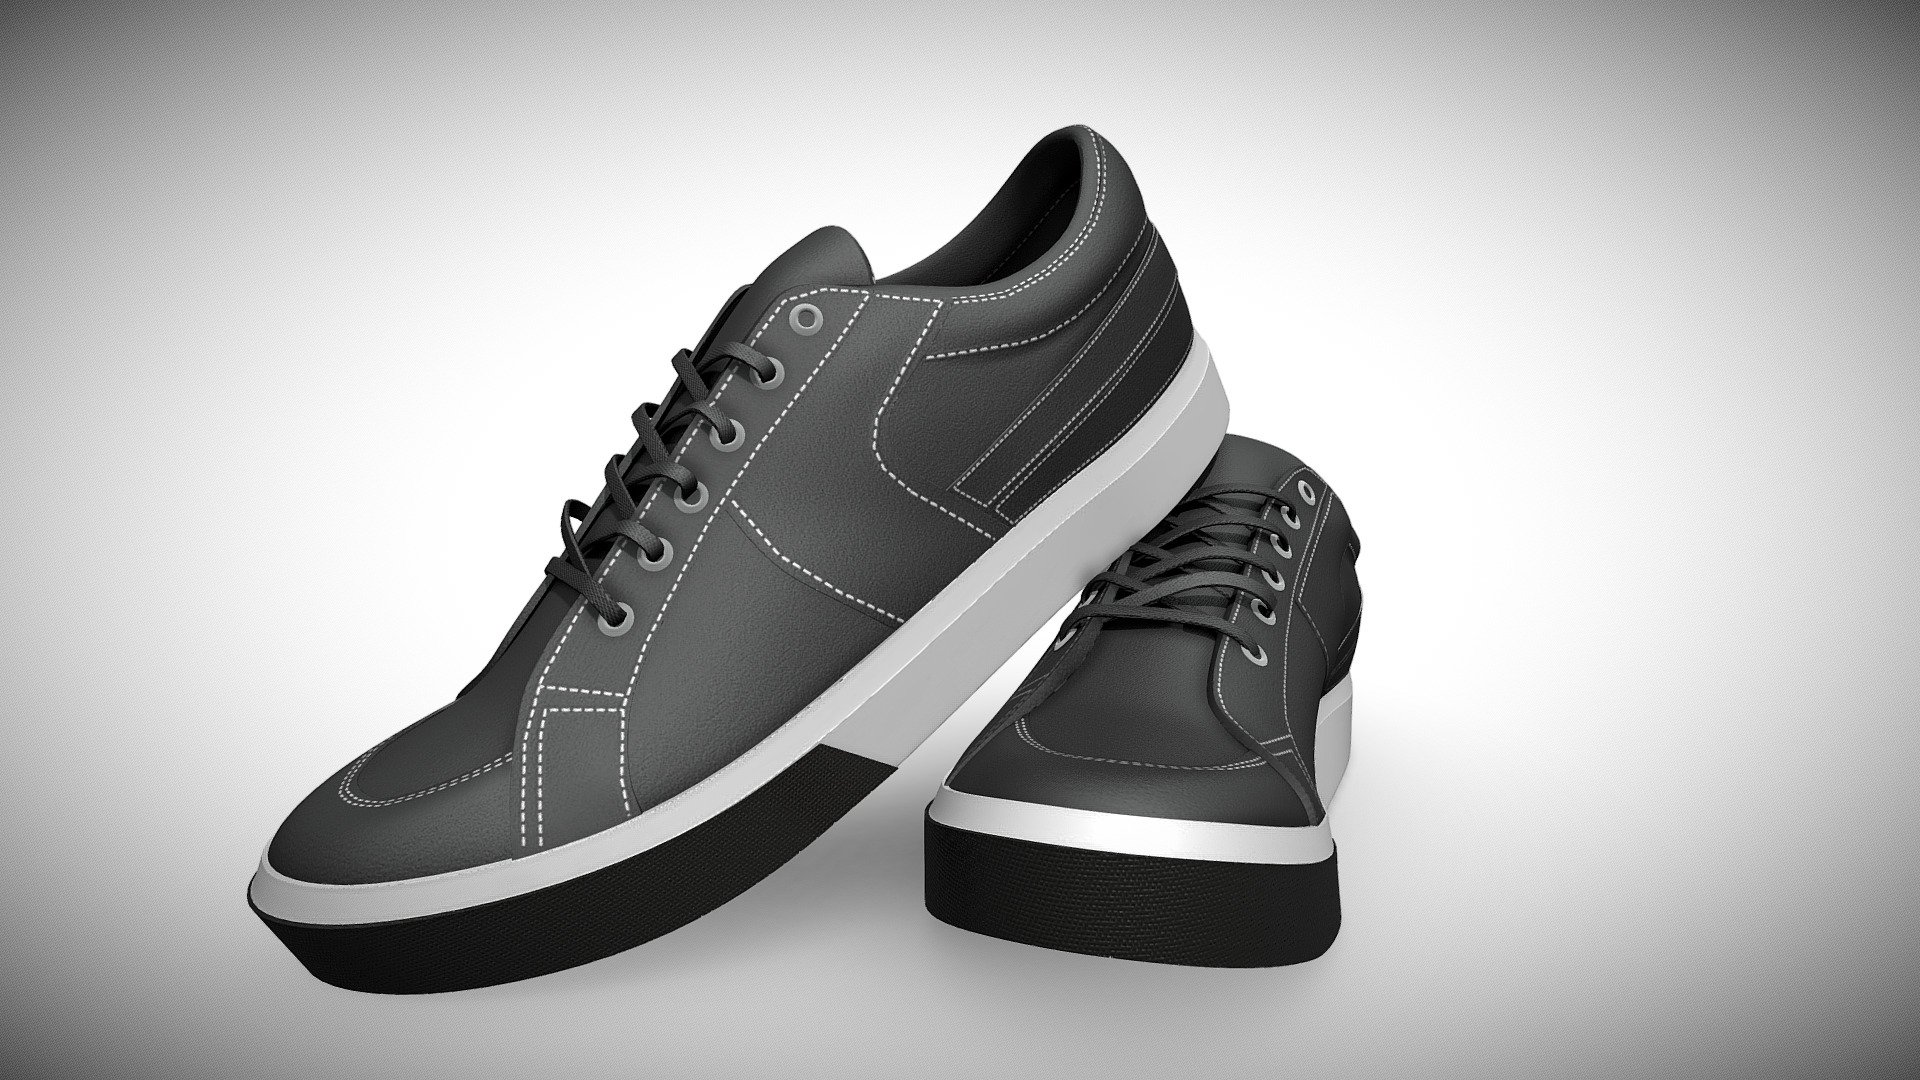 This high-quality 3D model represents a pair of brand print lace-up sneakers, stylish and trendy footwear that combines comfort and fashion. The model accurately depicts the physical design and features of the sneakers.

The sneakers are designed with a sporty and casual aesthetic, featuring a low-top silhouette and a lace-up closure system. The upper part of the sneakers showcases a pattern or branding specific to the chosen brand, adding a unique and recognizable touch to the desig

Whether you need it for product showcases, fashion presentations, or any other creative project, this 3D model of brand print lace-up sneakers will help you accurately visualize and showcase the footwear in a virtual environment.

Note: Please remember to respect intellectual property rights and ensure you have the necessary permissions to use and distribute any 3D models or designs based on copyrighted brands or products 3d model